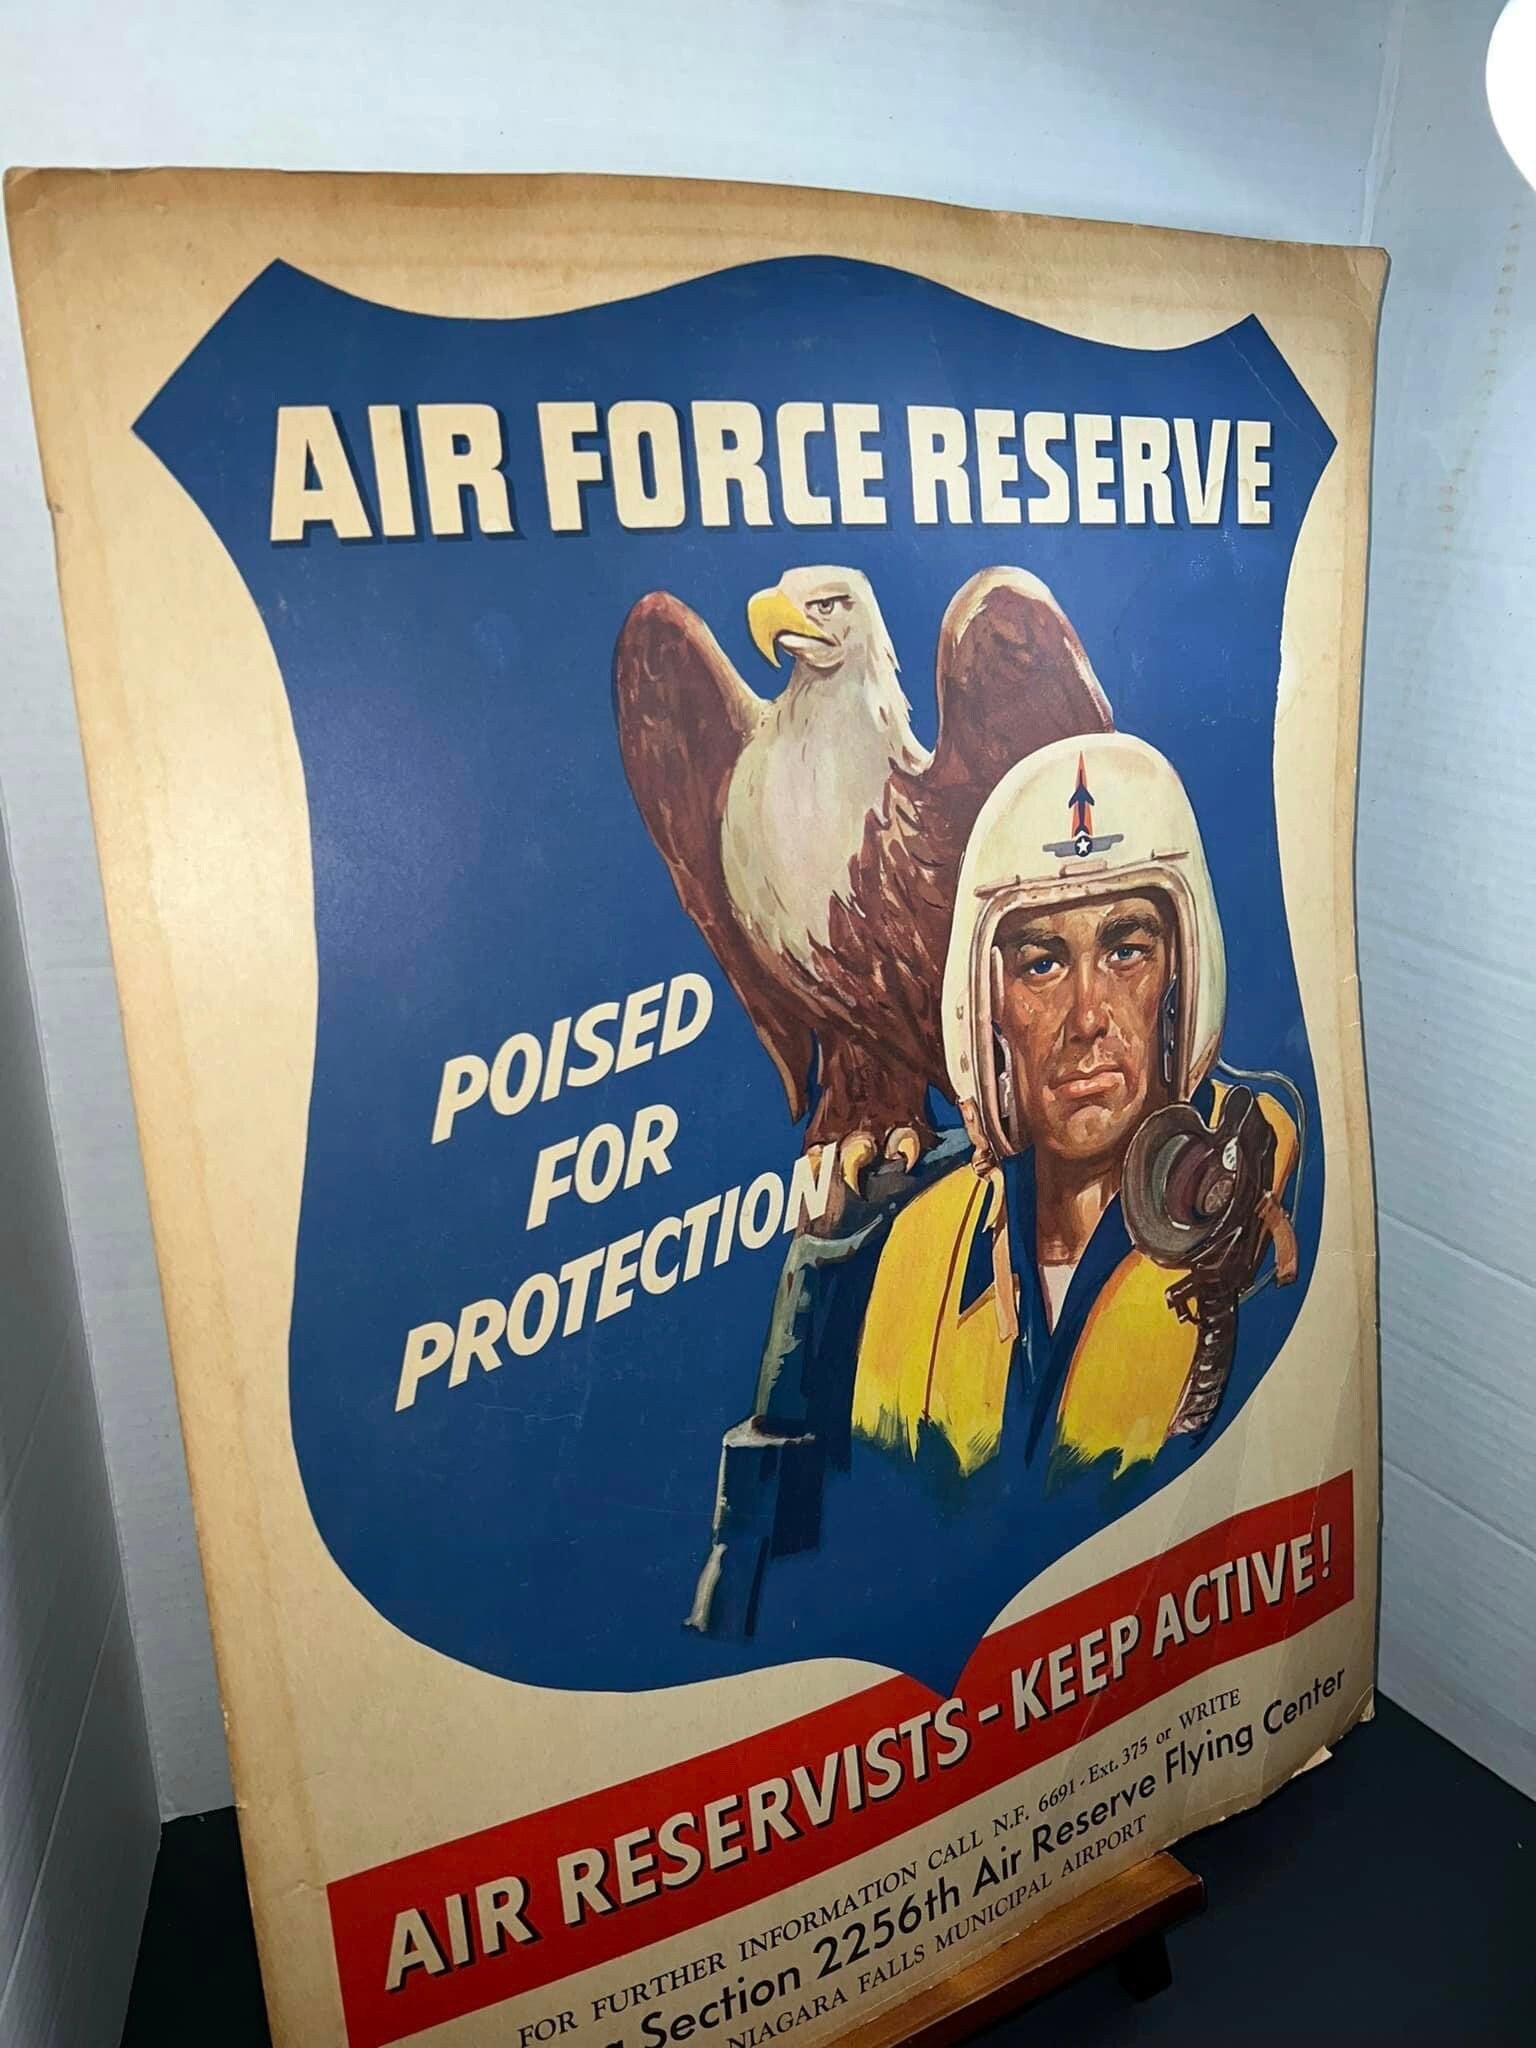 Vintage 1950s Air Force cardstock Air Force reserve advertising Niagara Falls New York military army post ww2